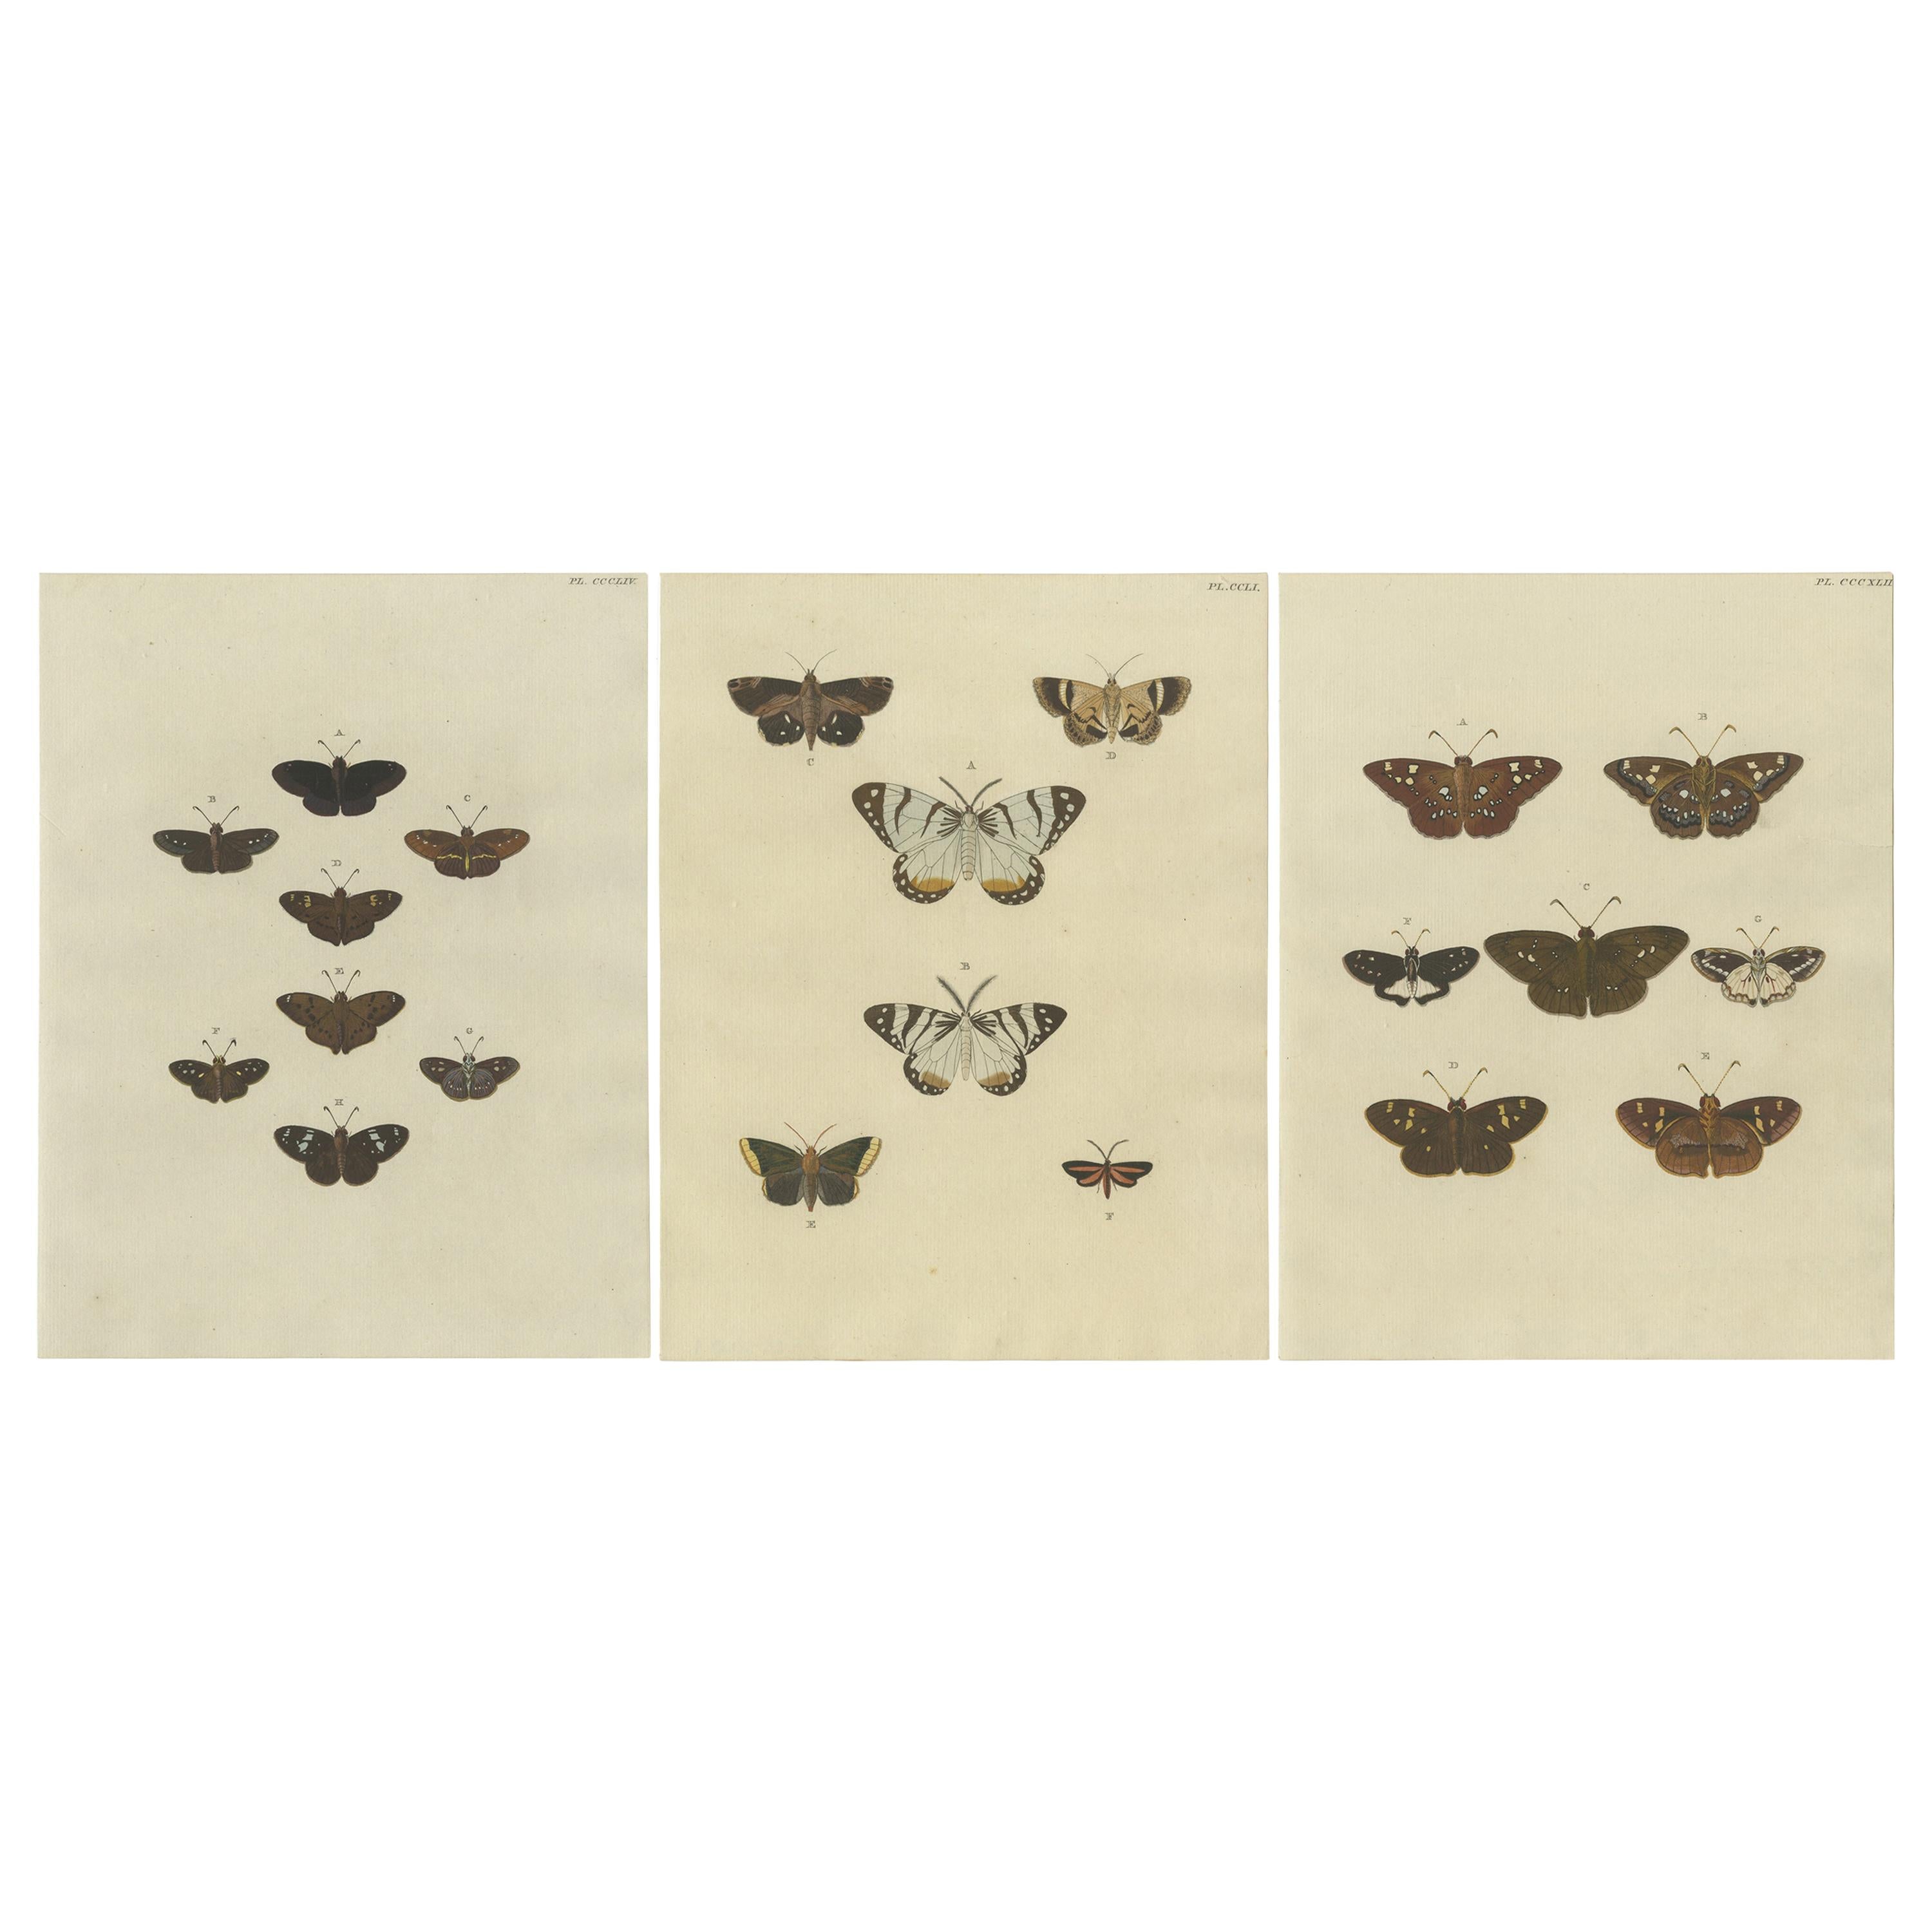 Set of 3 Antique Butterfly Prints 'pl. 354' by Cramer, 1779